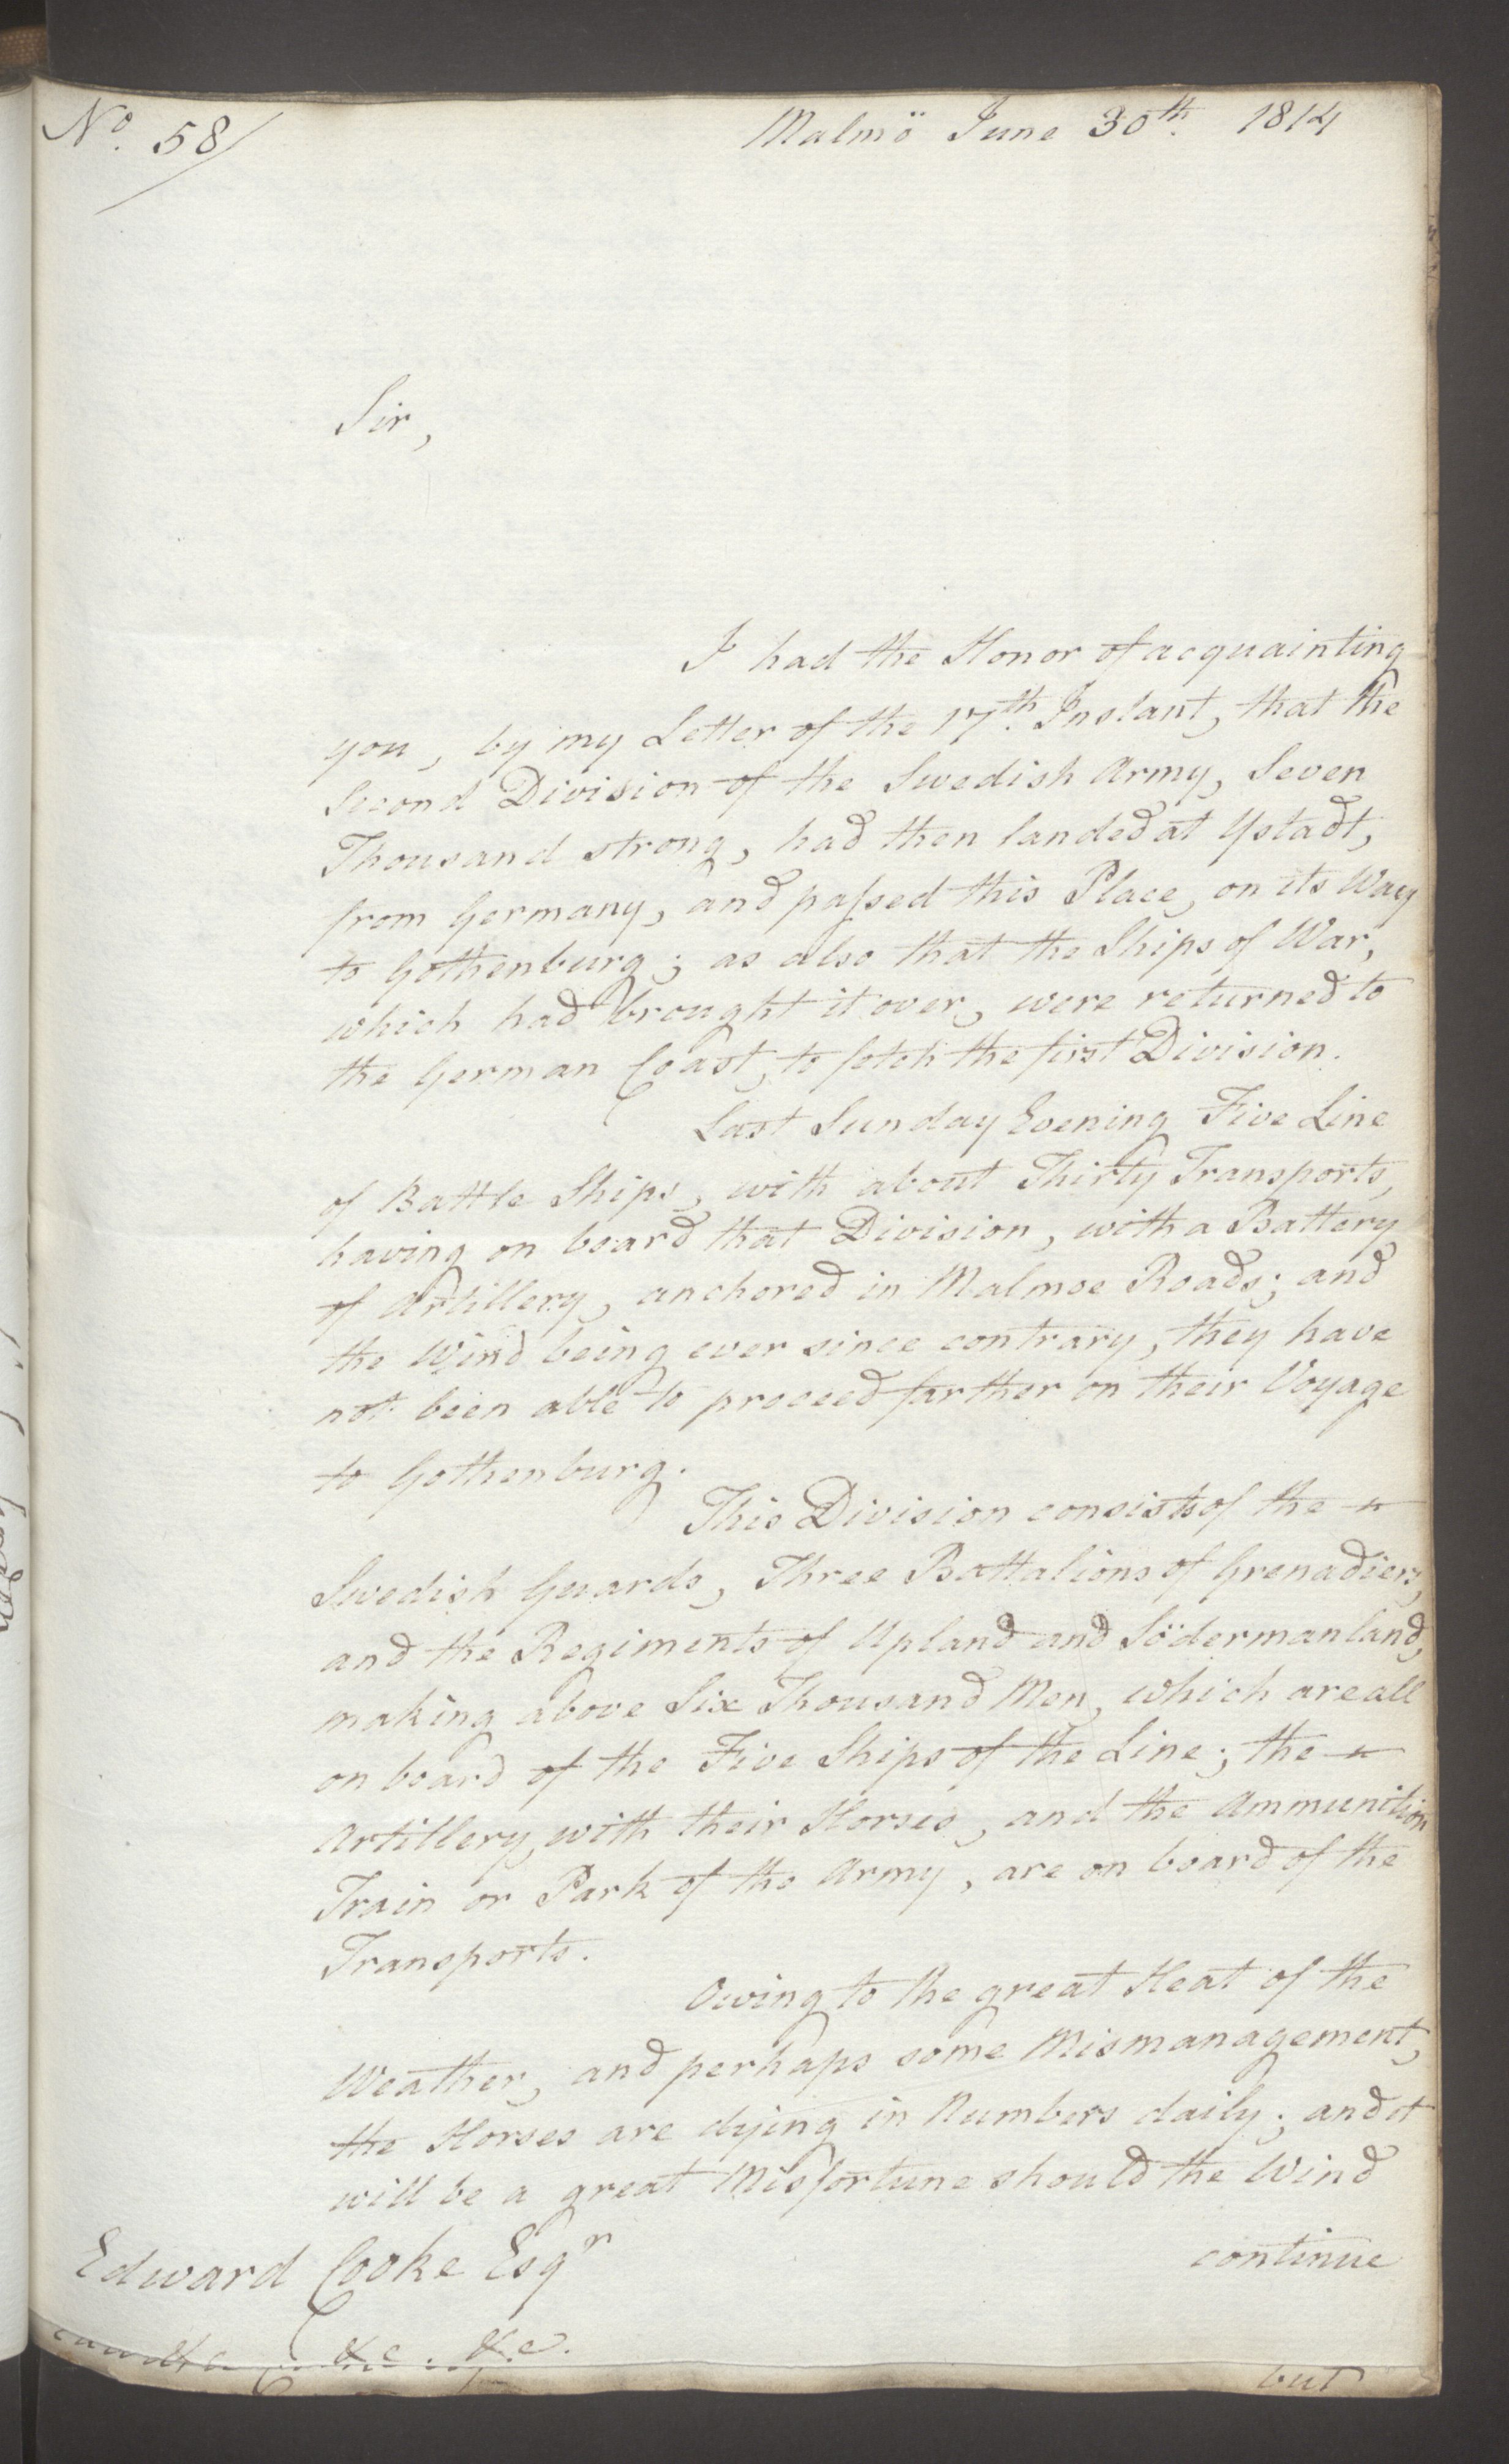 Foreign Office*, UKA/-/FO 38/16: Sir C. Gordon. Reports from Malmö, Jonkoping, and Helsingborg, 1814, p. 67